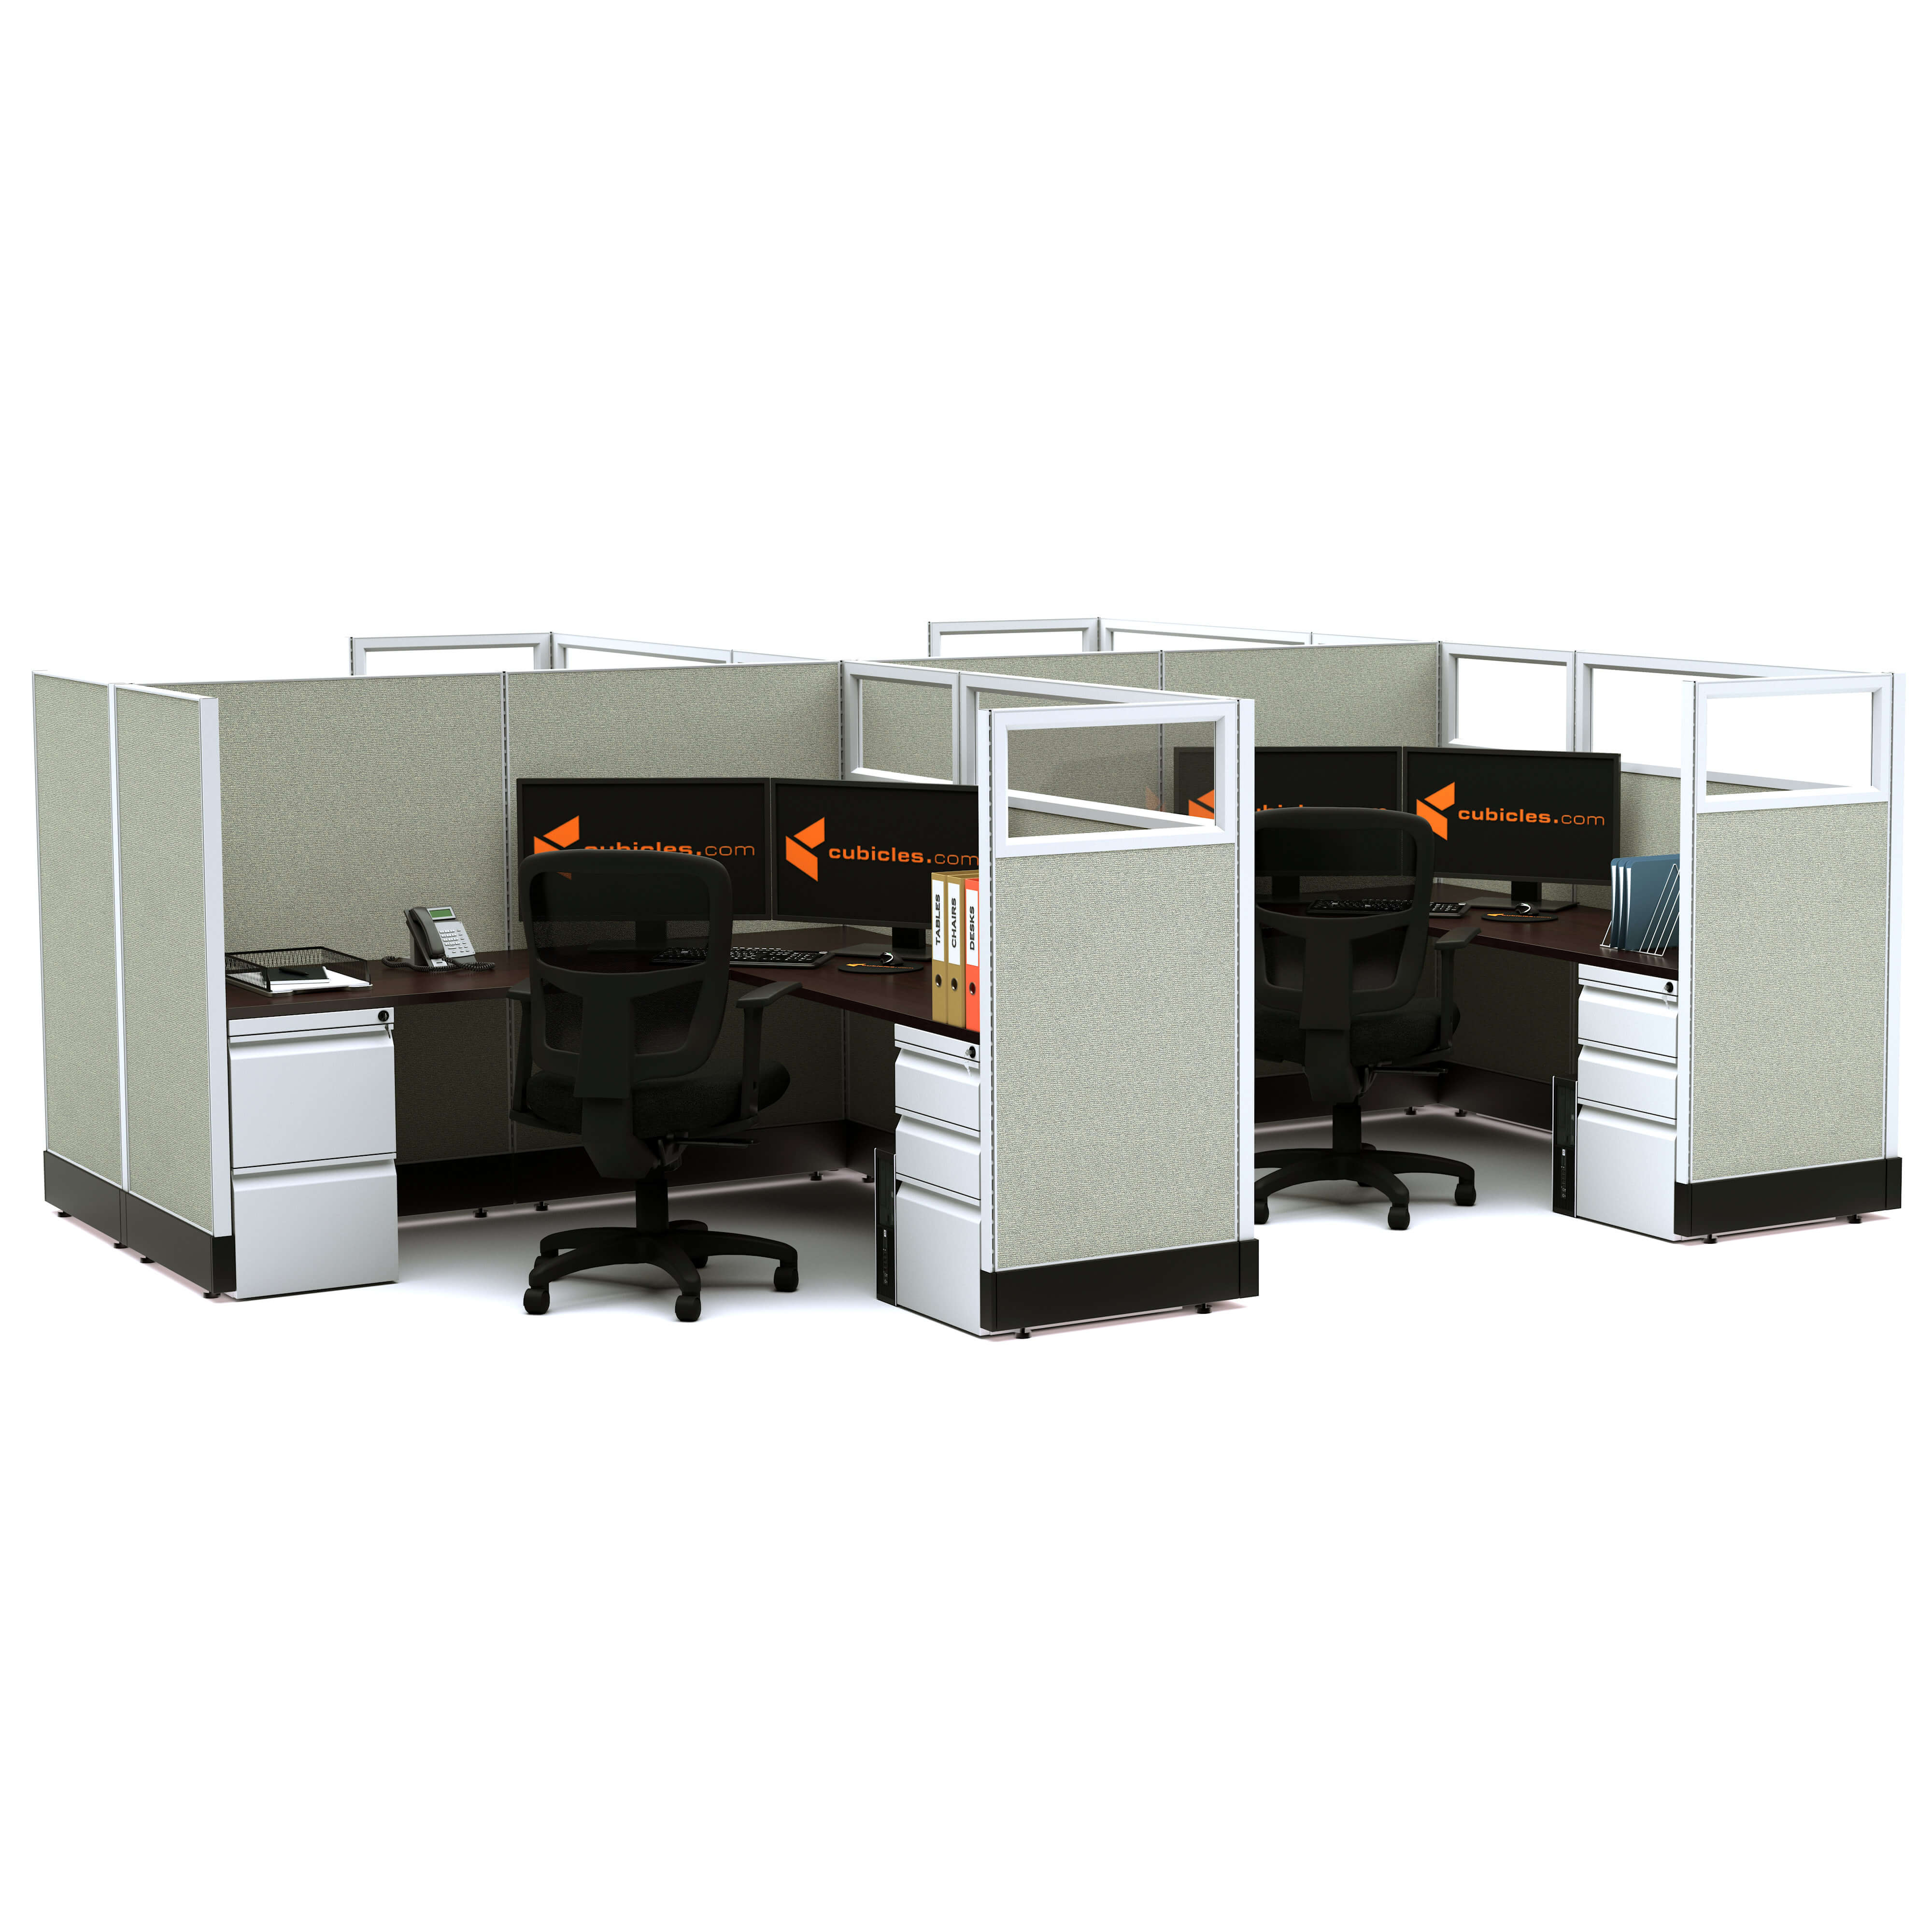 Modular office furniture partial glass office cubicles 53h 4pack cluster non powered